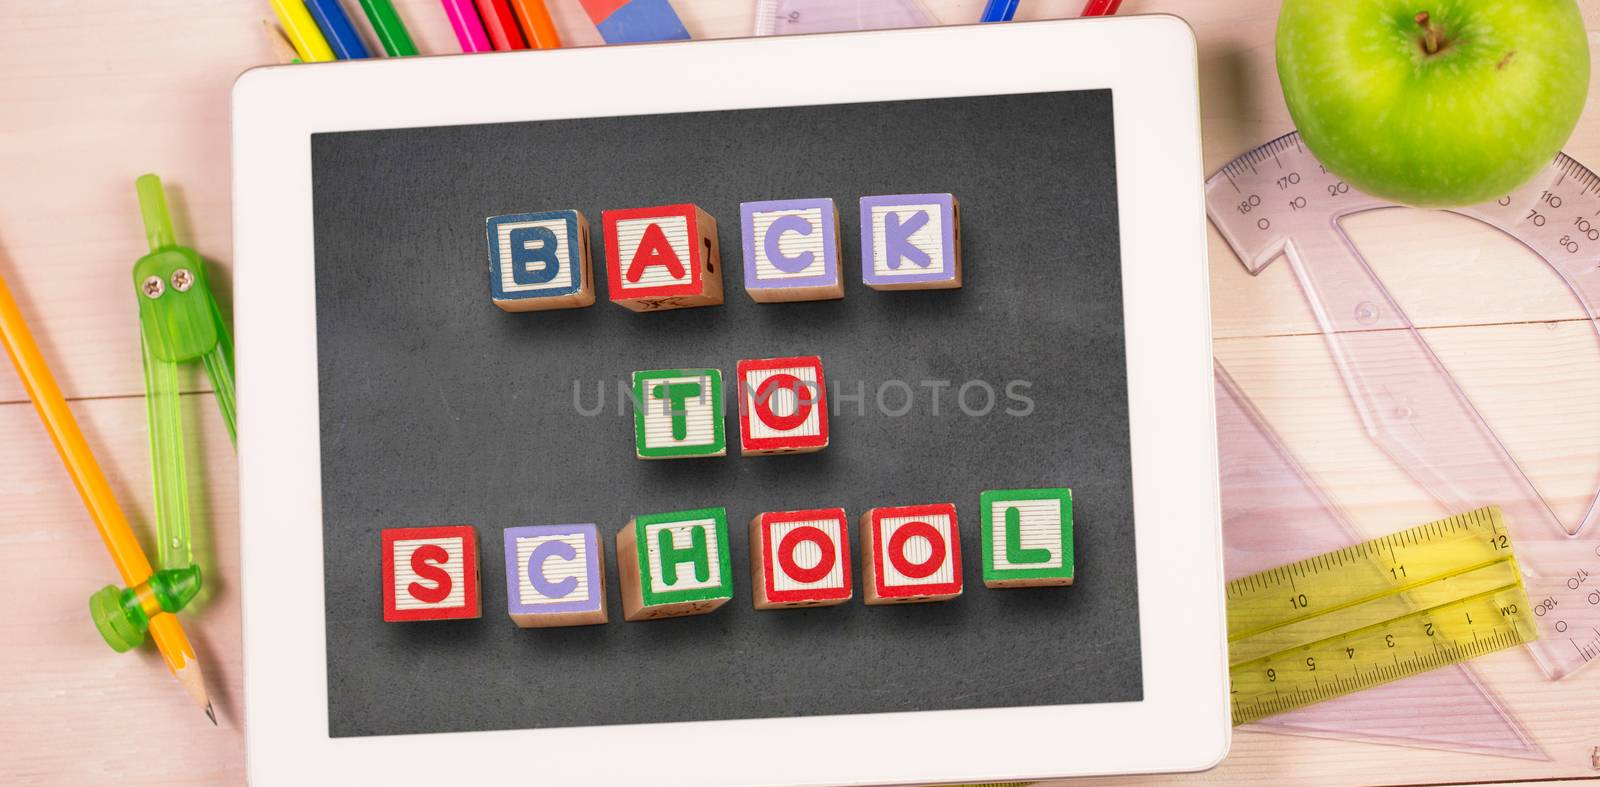 Back to school message against students desk with tablet pc